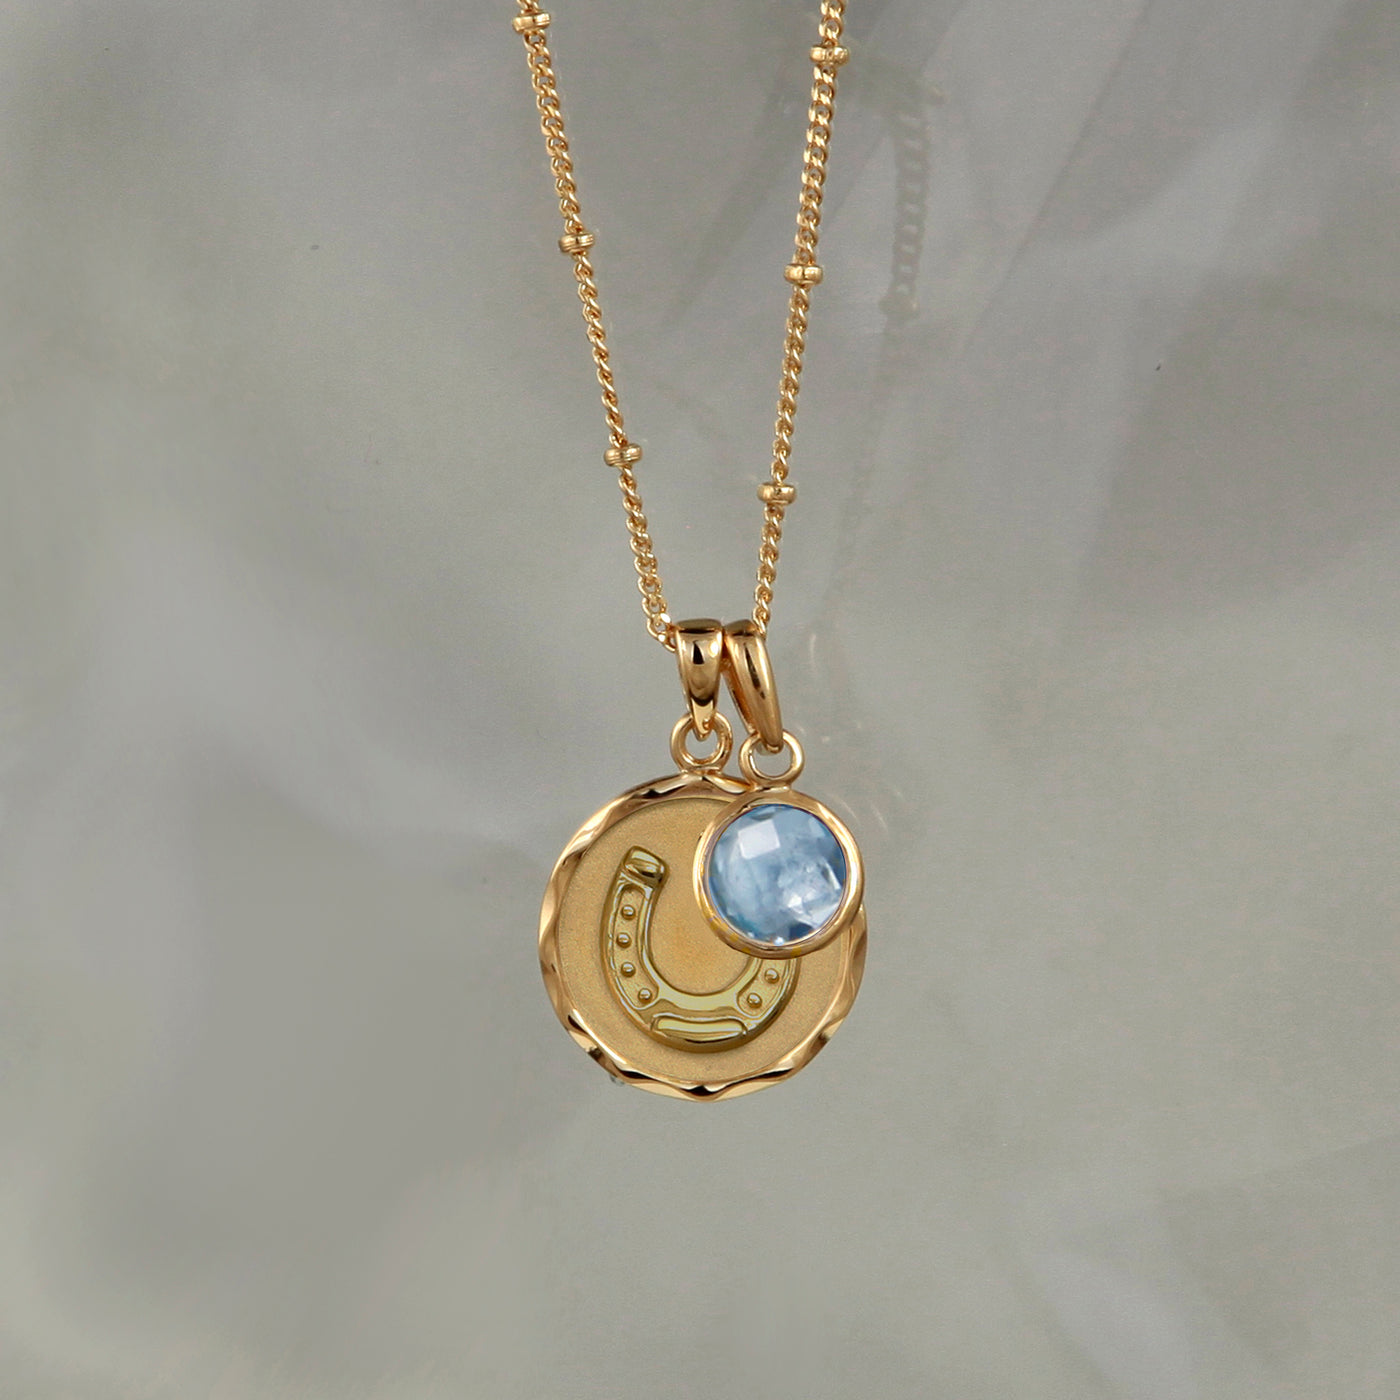 Horseshoe Charm Necklace In Gold with Birthstone